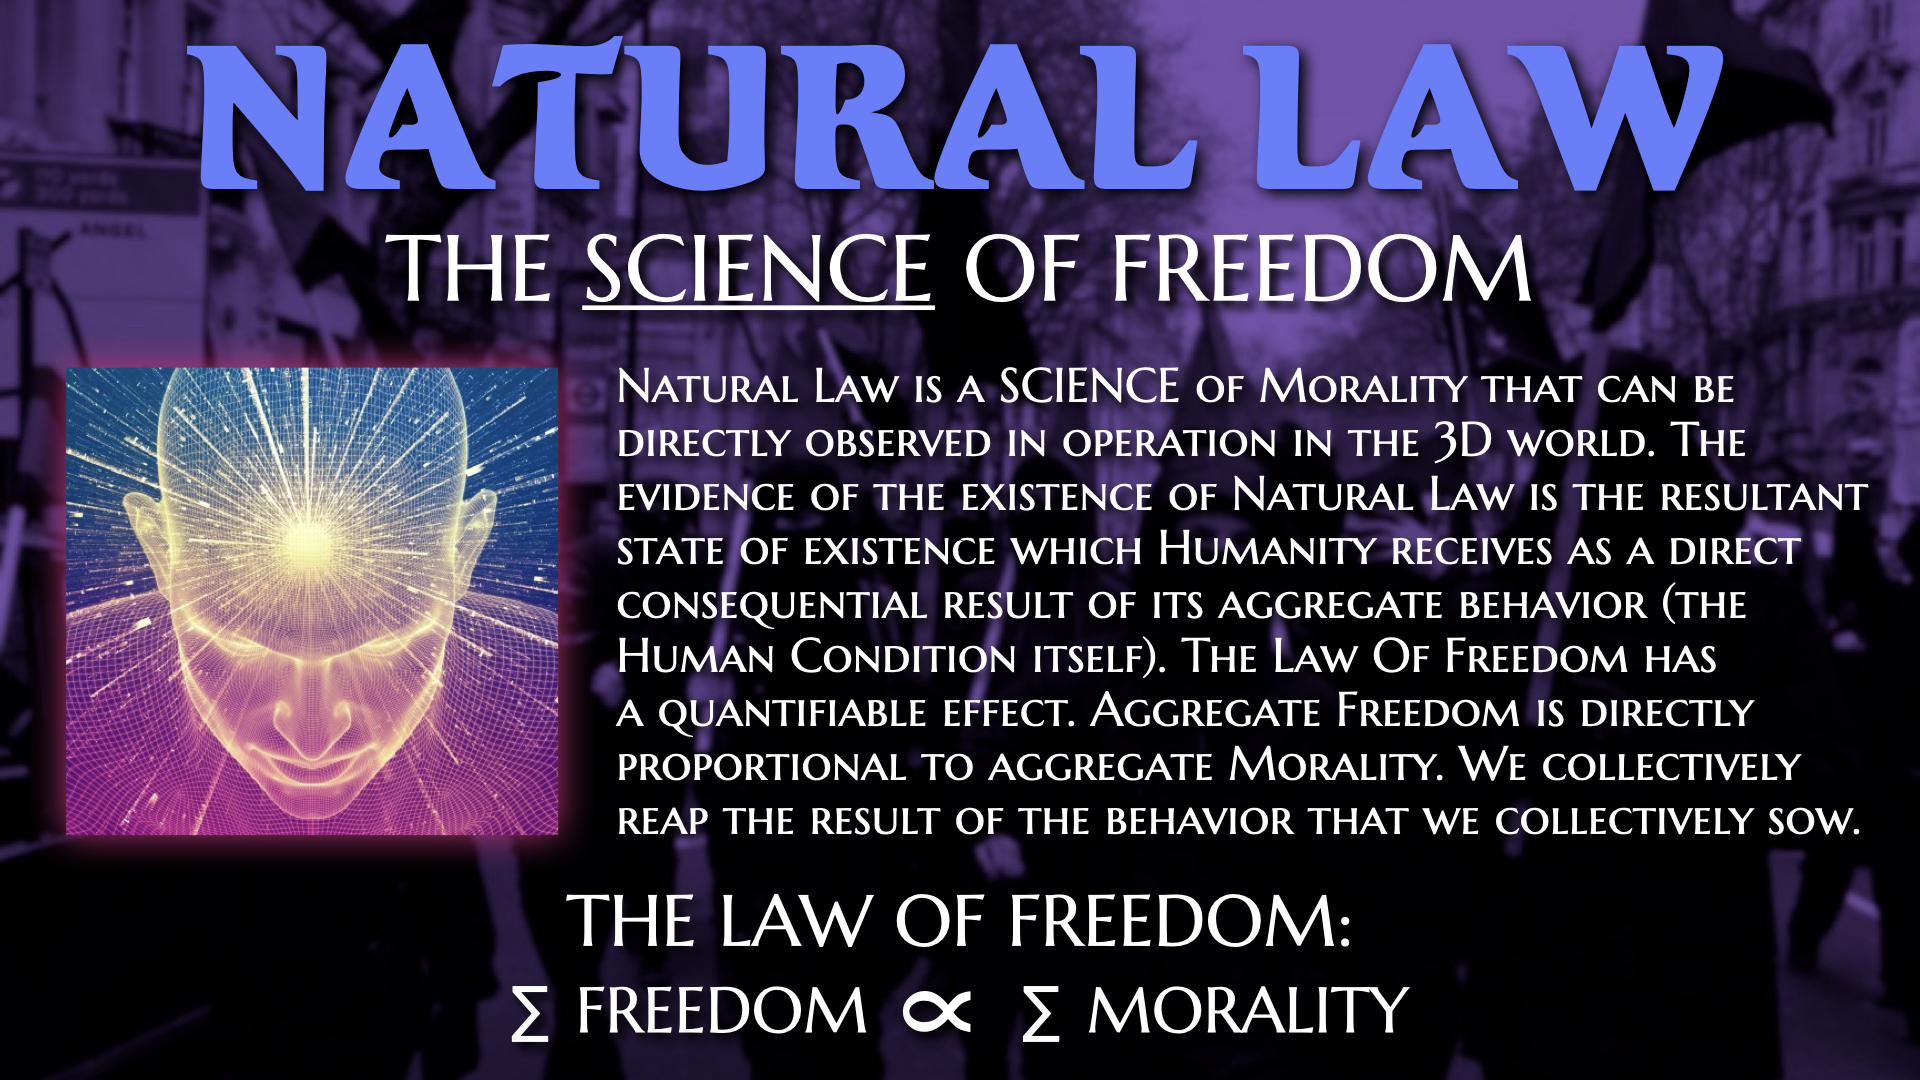 THE SCIENCE OF NATURAL LAW PT.1